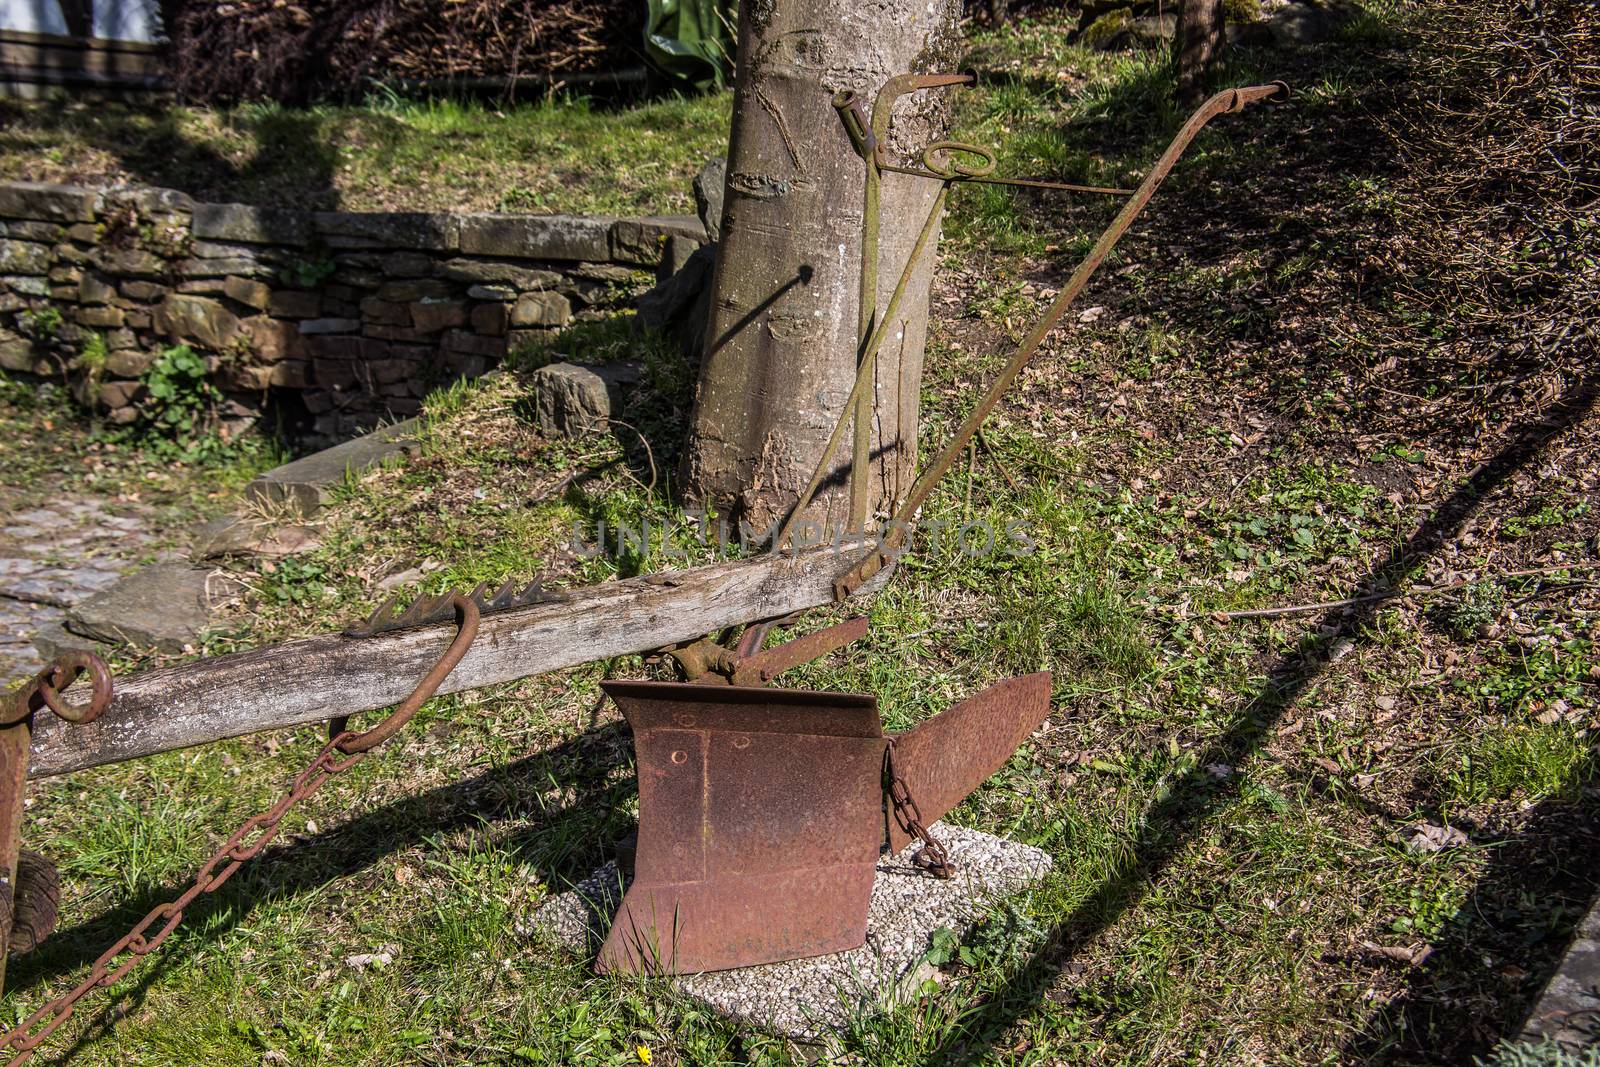 Plow made of iron in agriculture